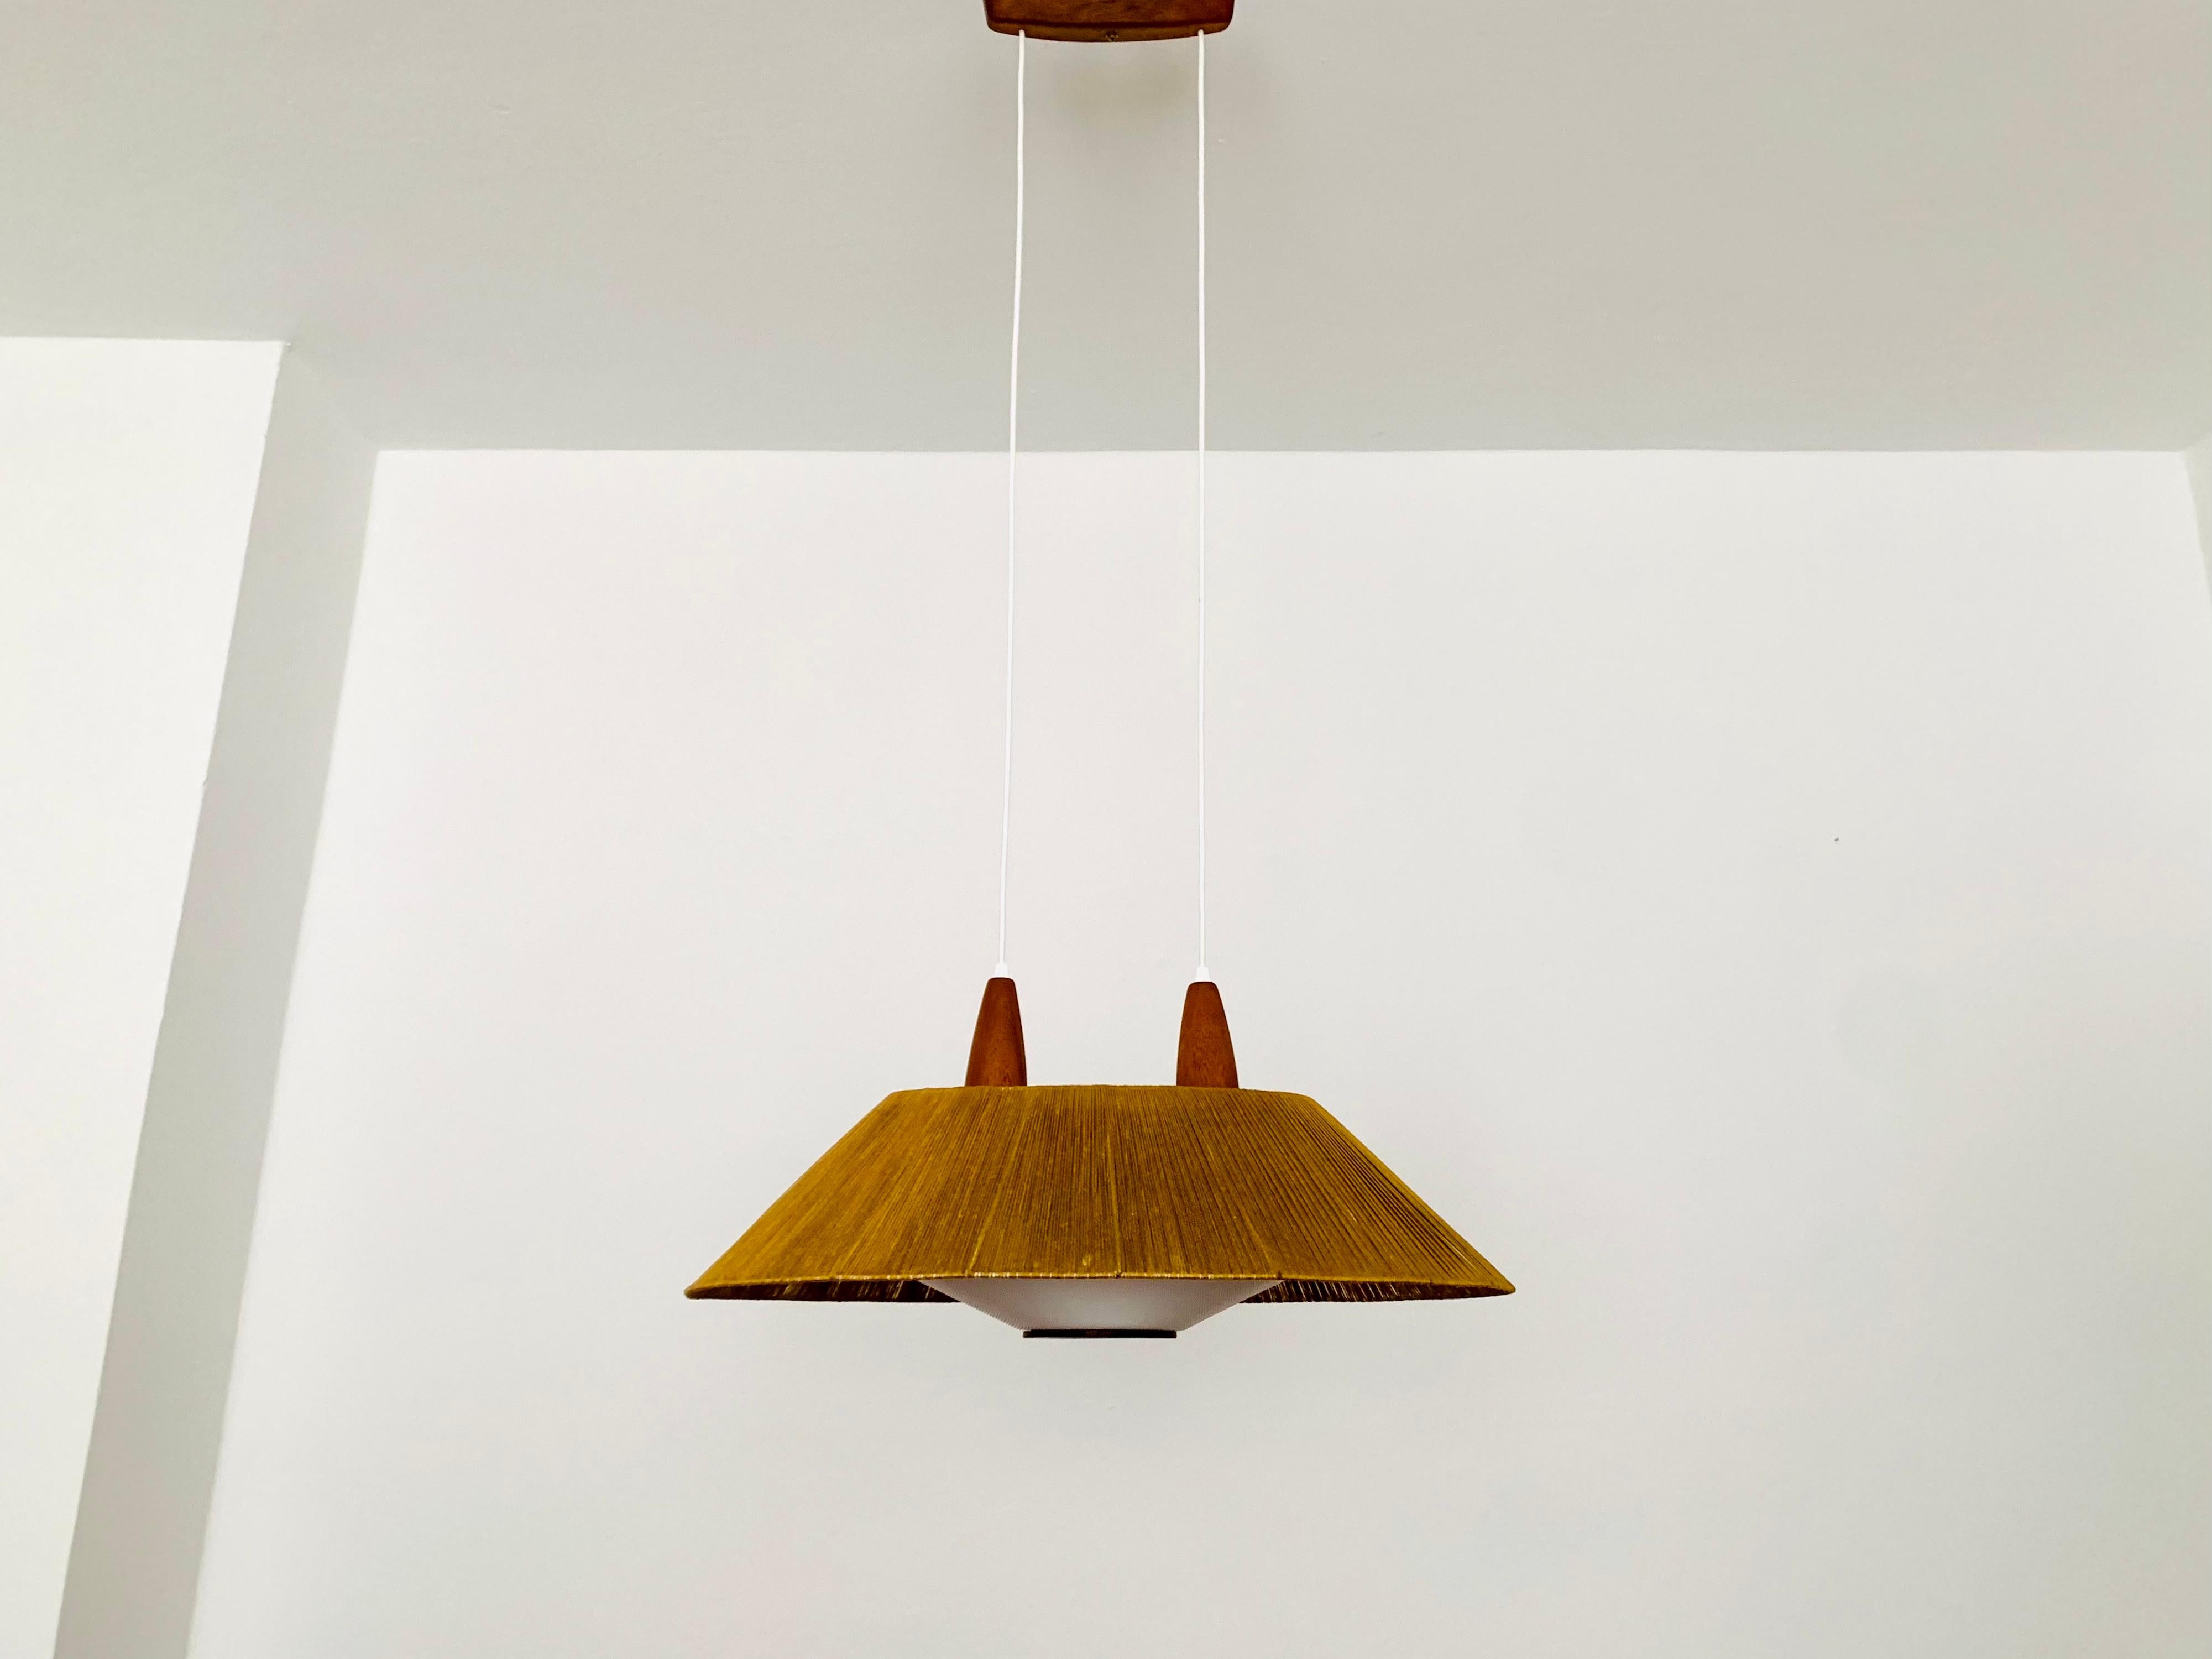 Exceptionally beautiful and large pendant lamp from the 1960s.
The design is very unusual.
The shape and the materials create a warm and very pleasant light.
The teak details are beautifully shaped.

Condition:

Very good vintage condition